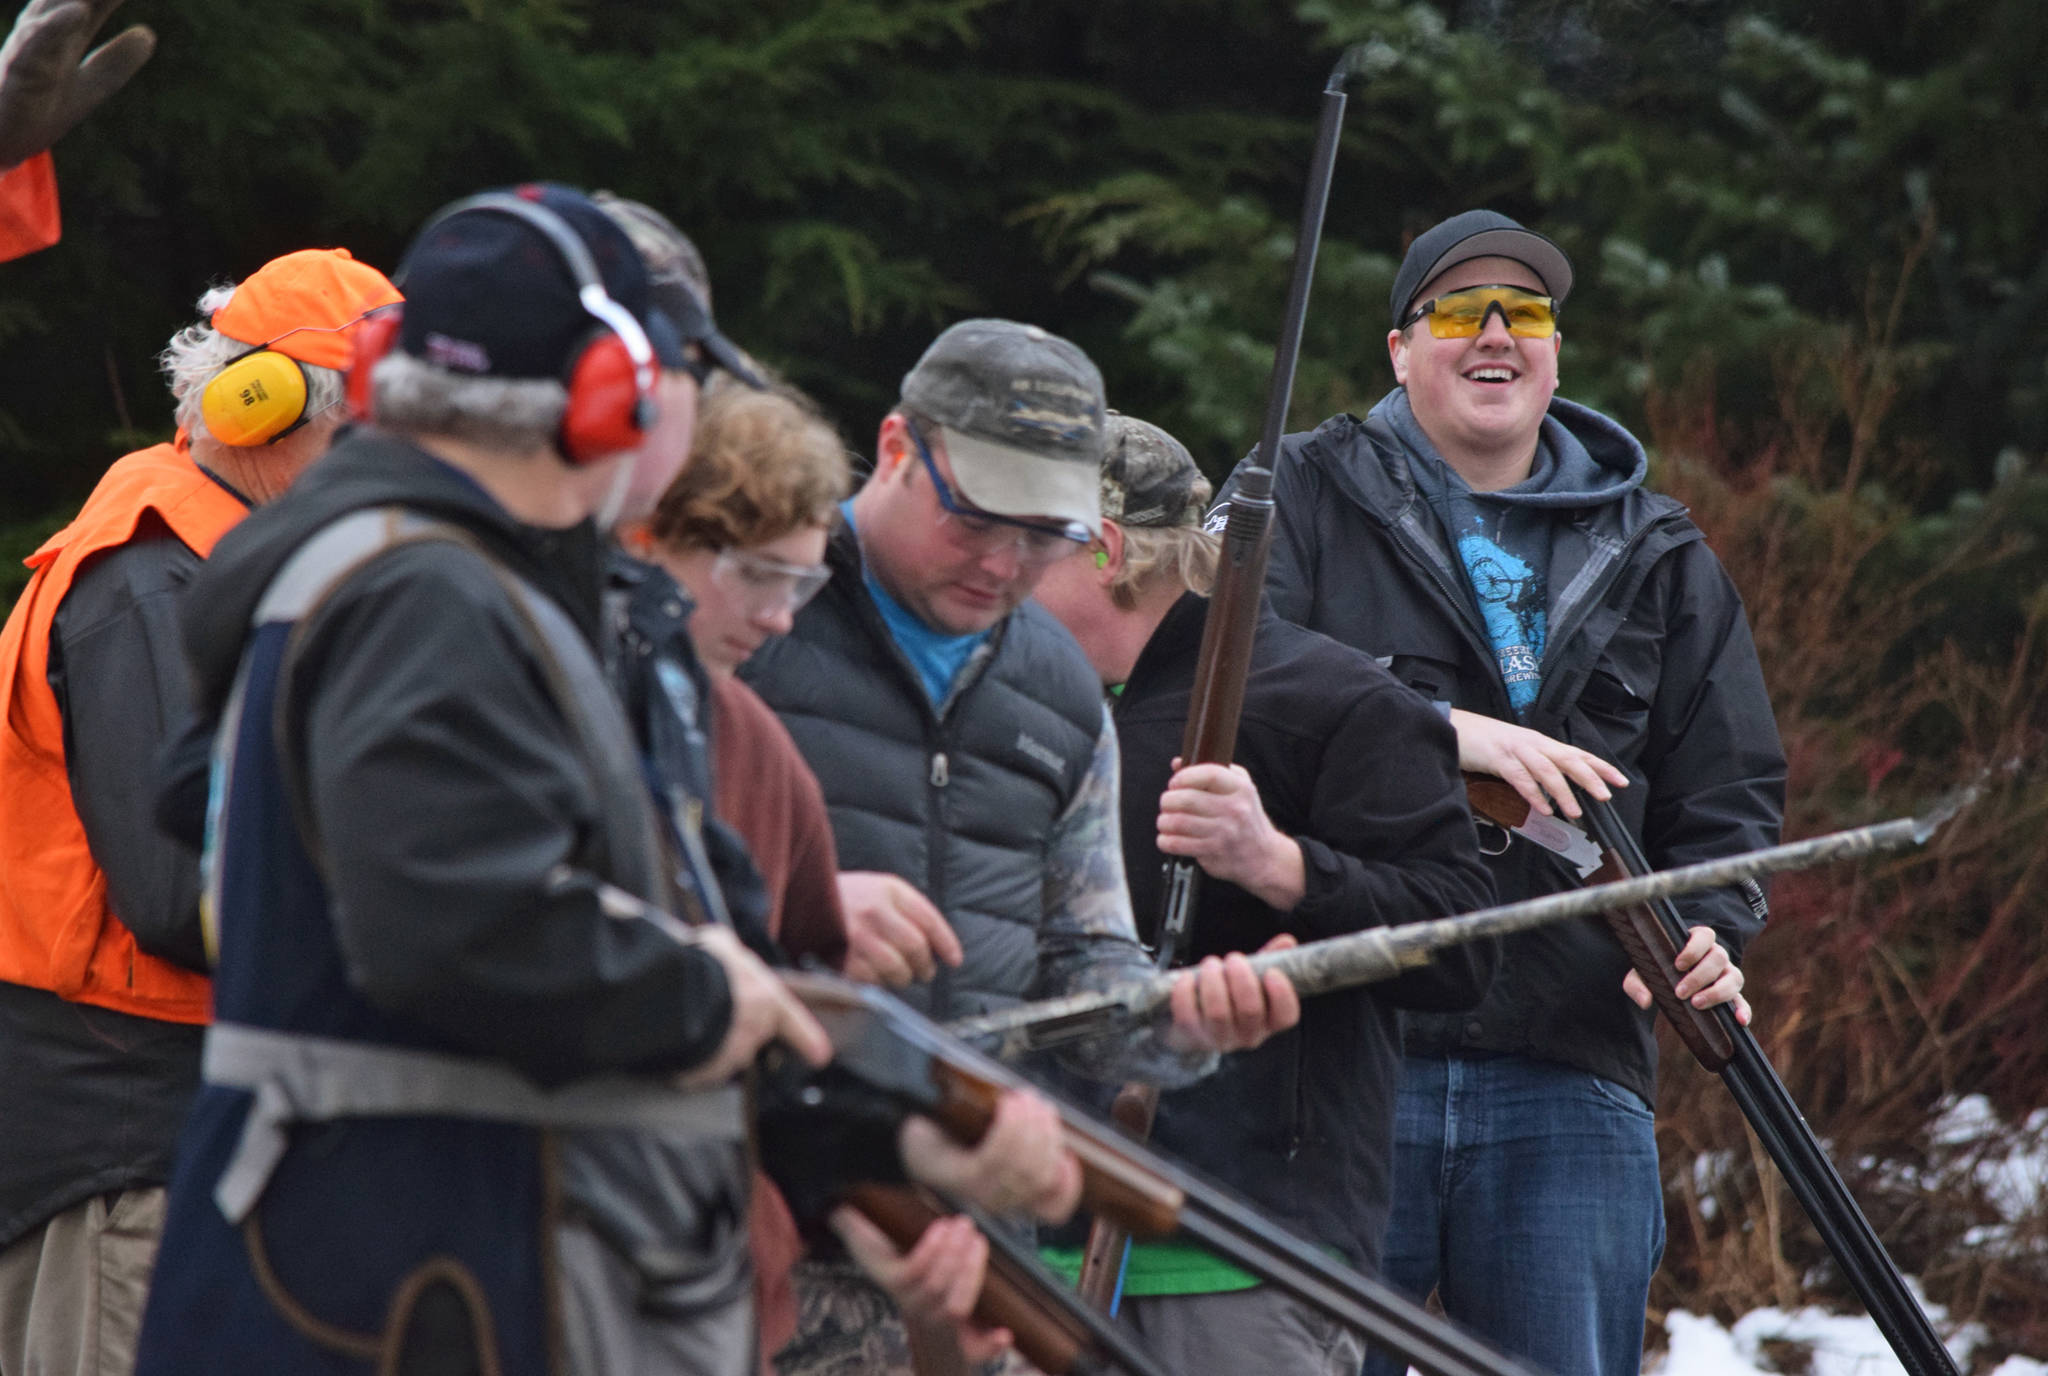 Eric Verrelli smiles after shooting in the Annie Oakley competition Saturday, Nov. 21, 2015 at the Juneau Gun Club’s Turkey Shoot. Verrelli won the competition, winning a frozen turkey. The Gun Club, Juneau Shooting Sports Foundation, Juneau Archery Club and the Alaska Department of Fish and Game host the shooting competition each year as a fundraiser. (James Brooks | Juneau Empire File)